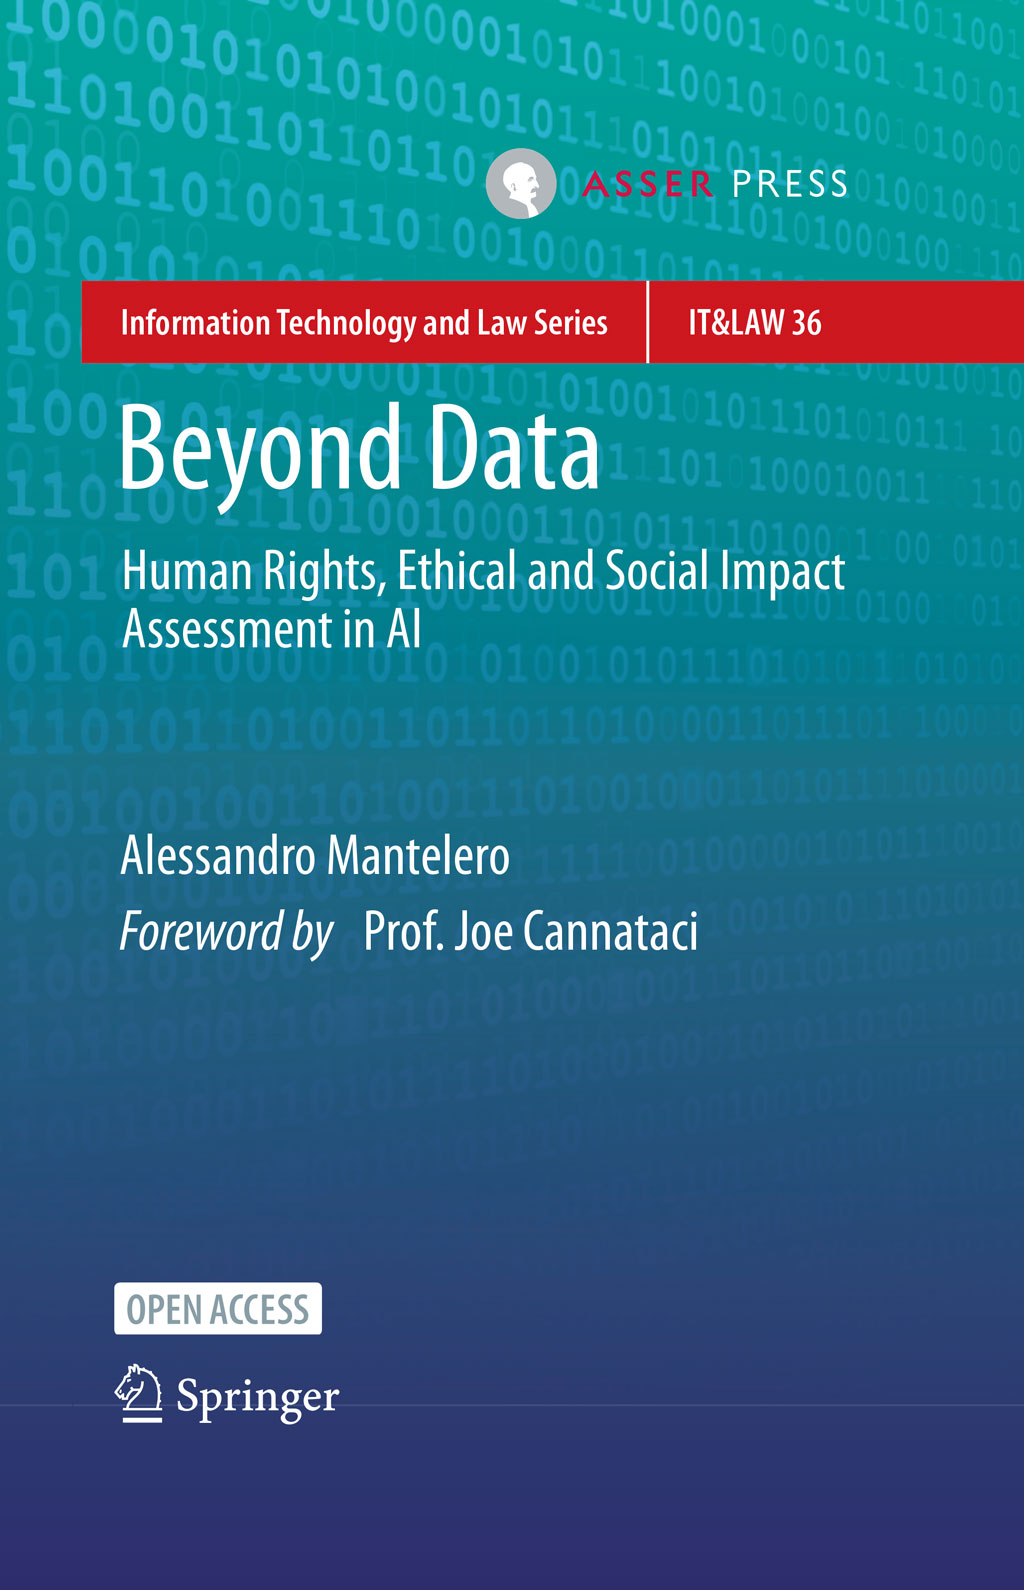 Beyond Data - Human Rights, Ethical and Social Impact Assessment in AI